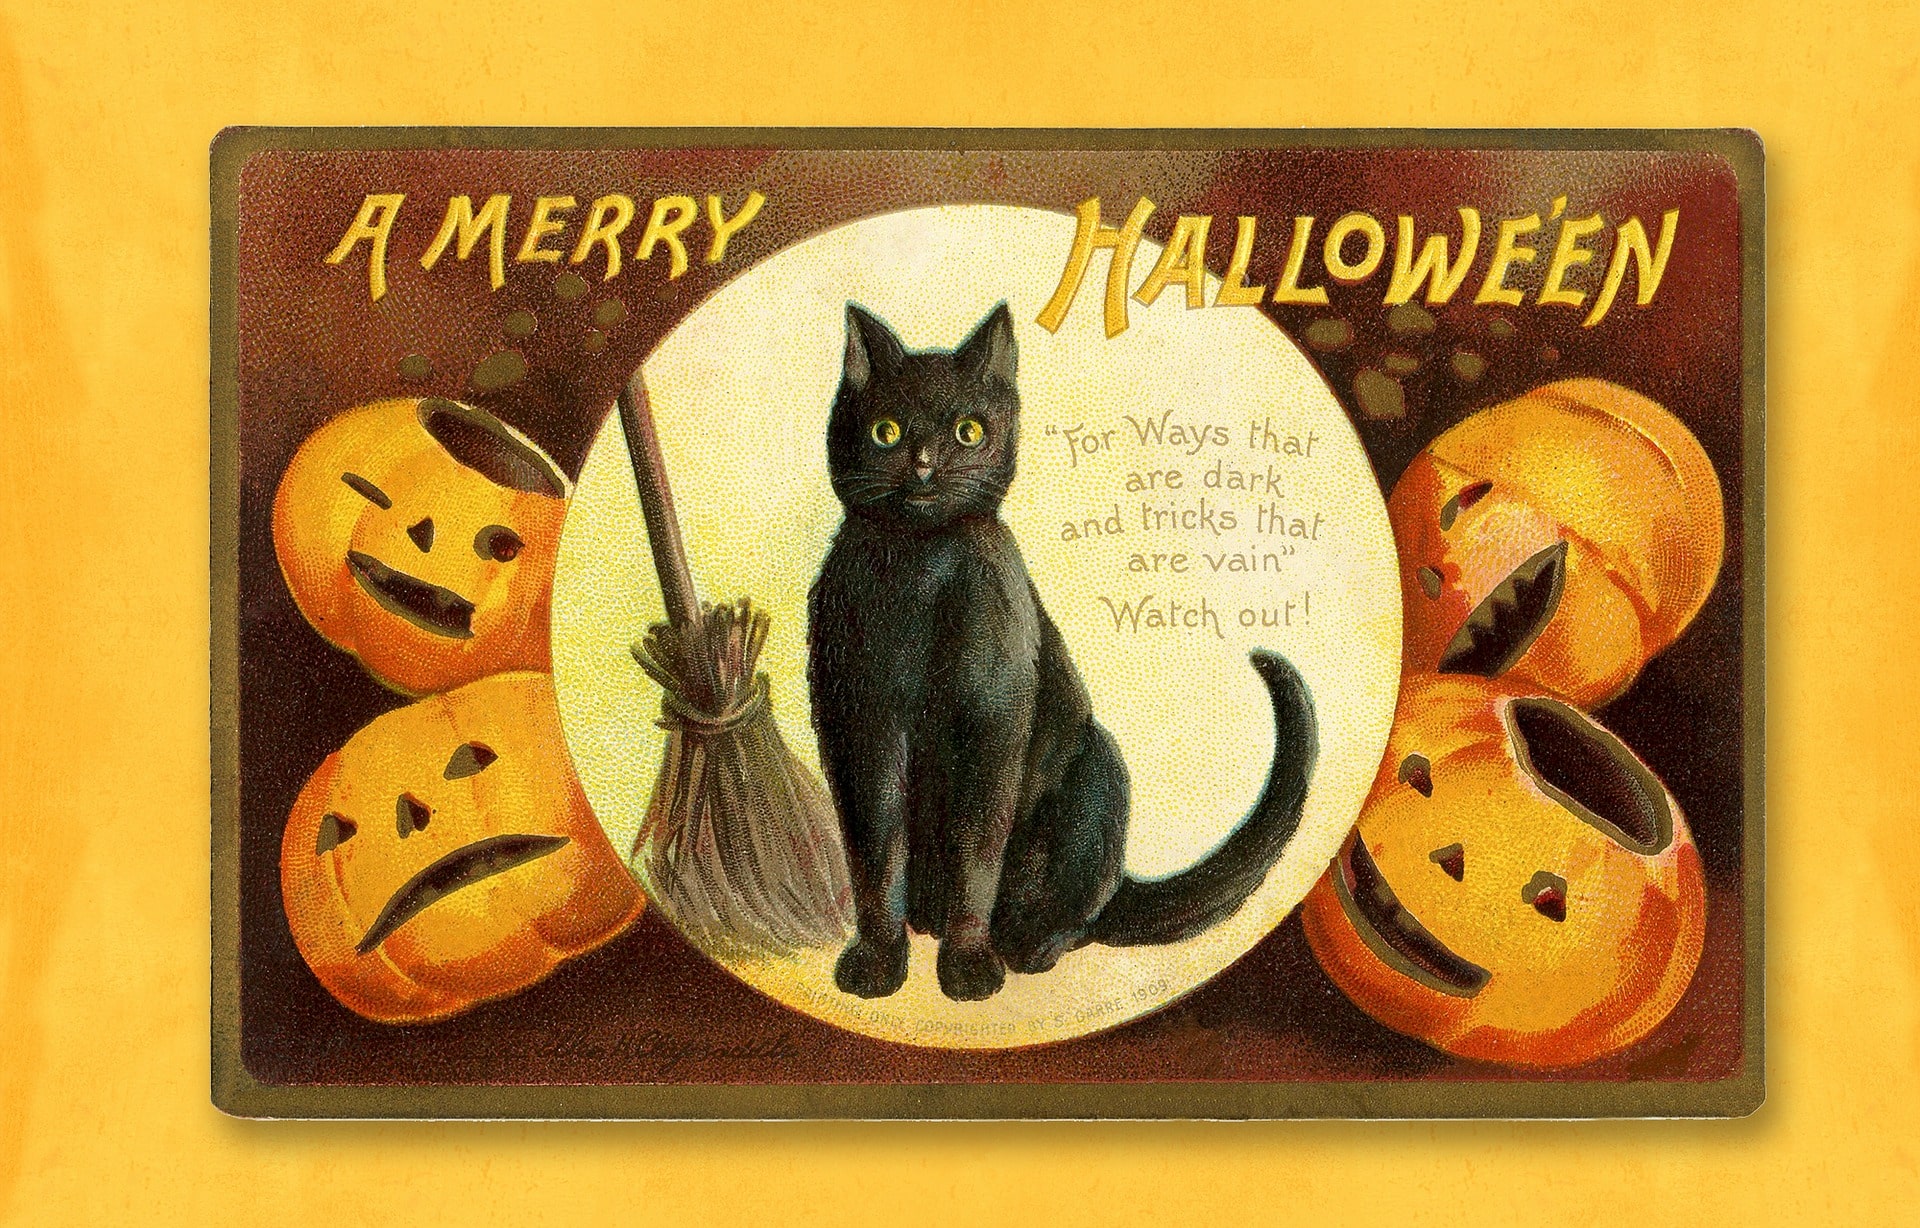 Why Black Cats Are Associated With Halloween?